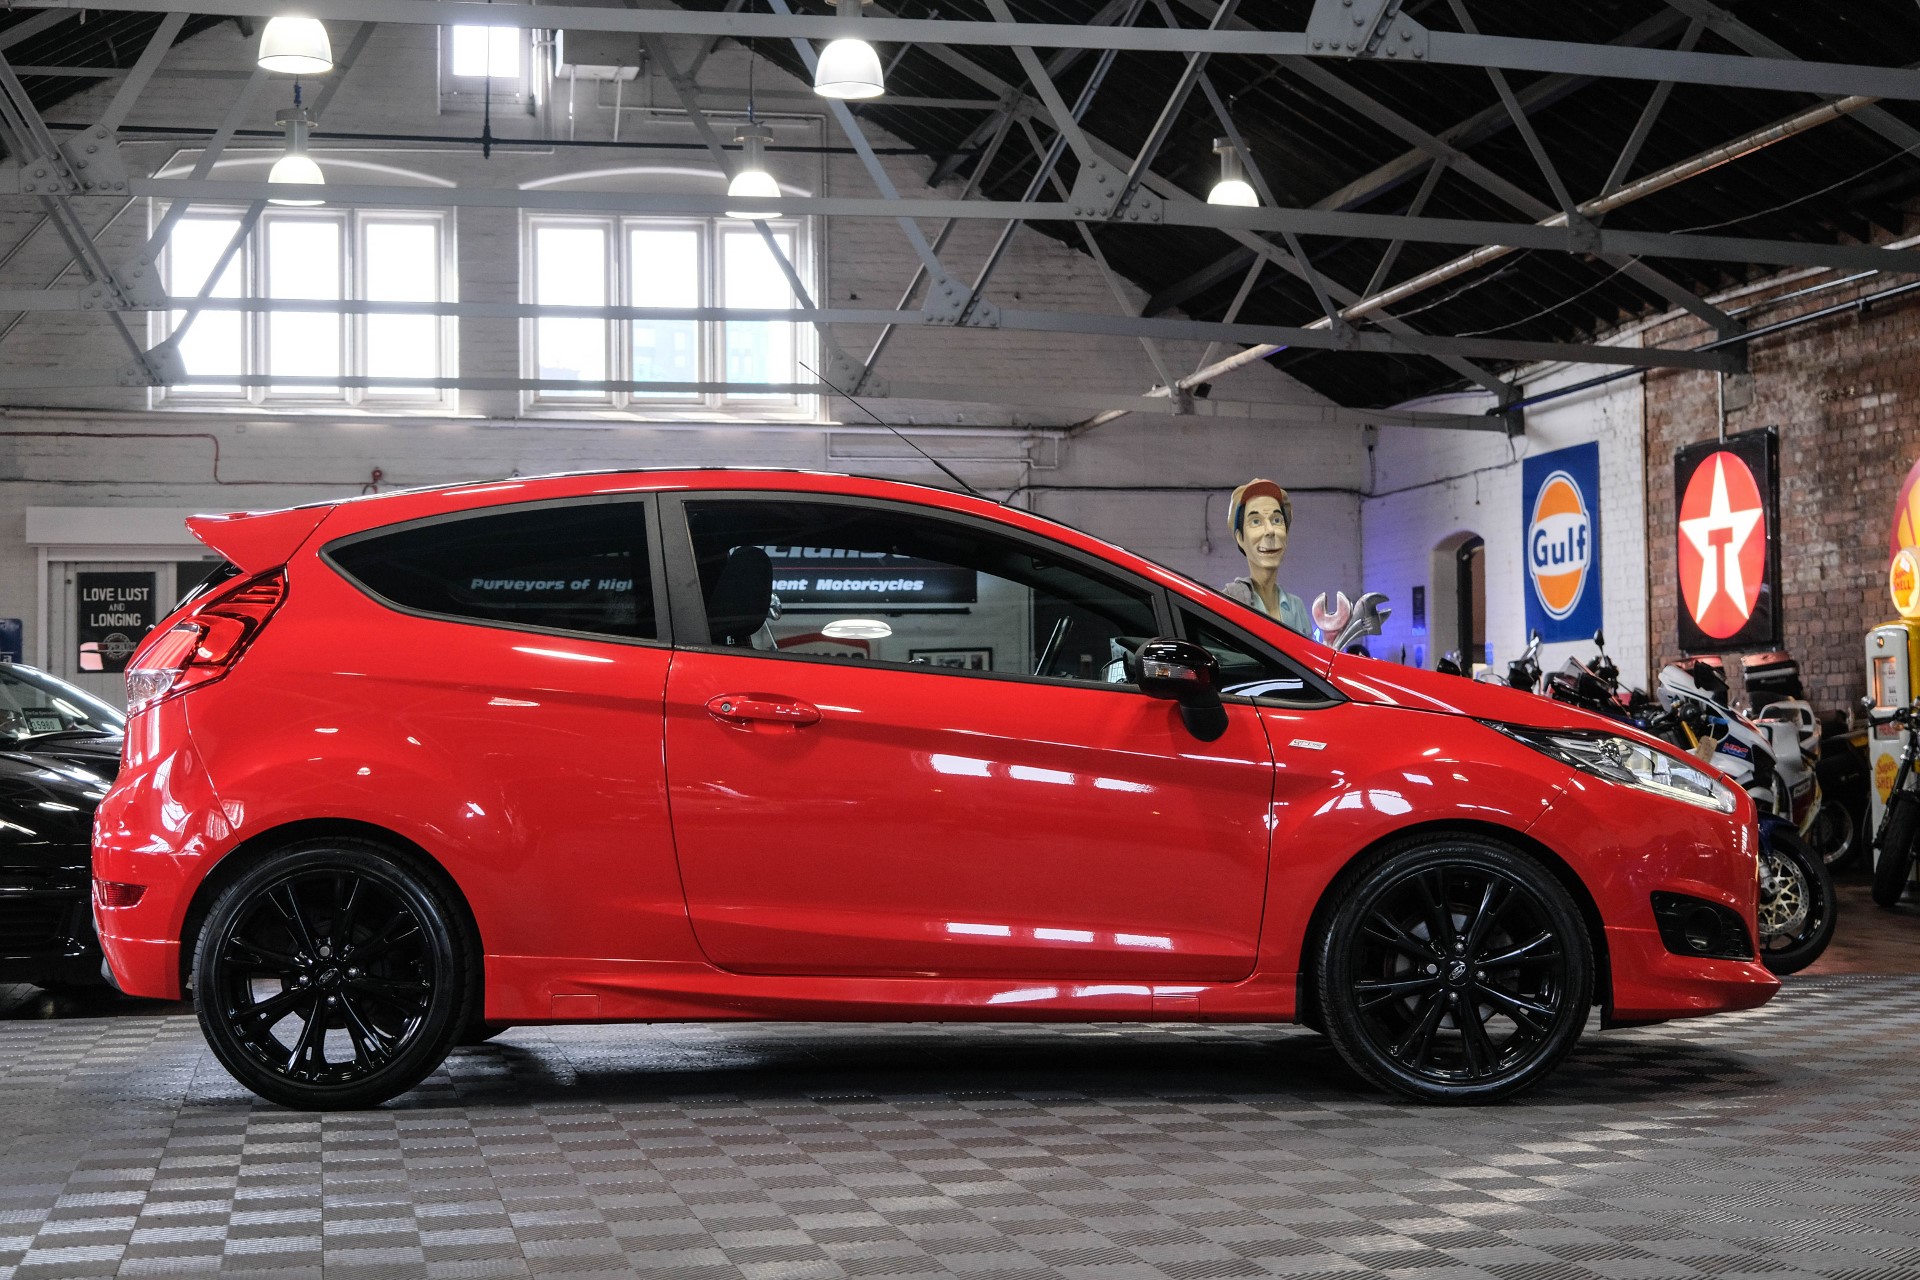 Ford Fiesta, The Car Specialists